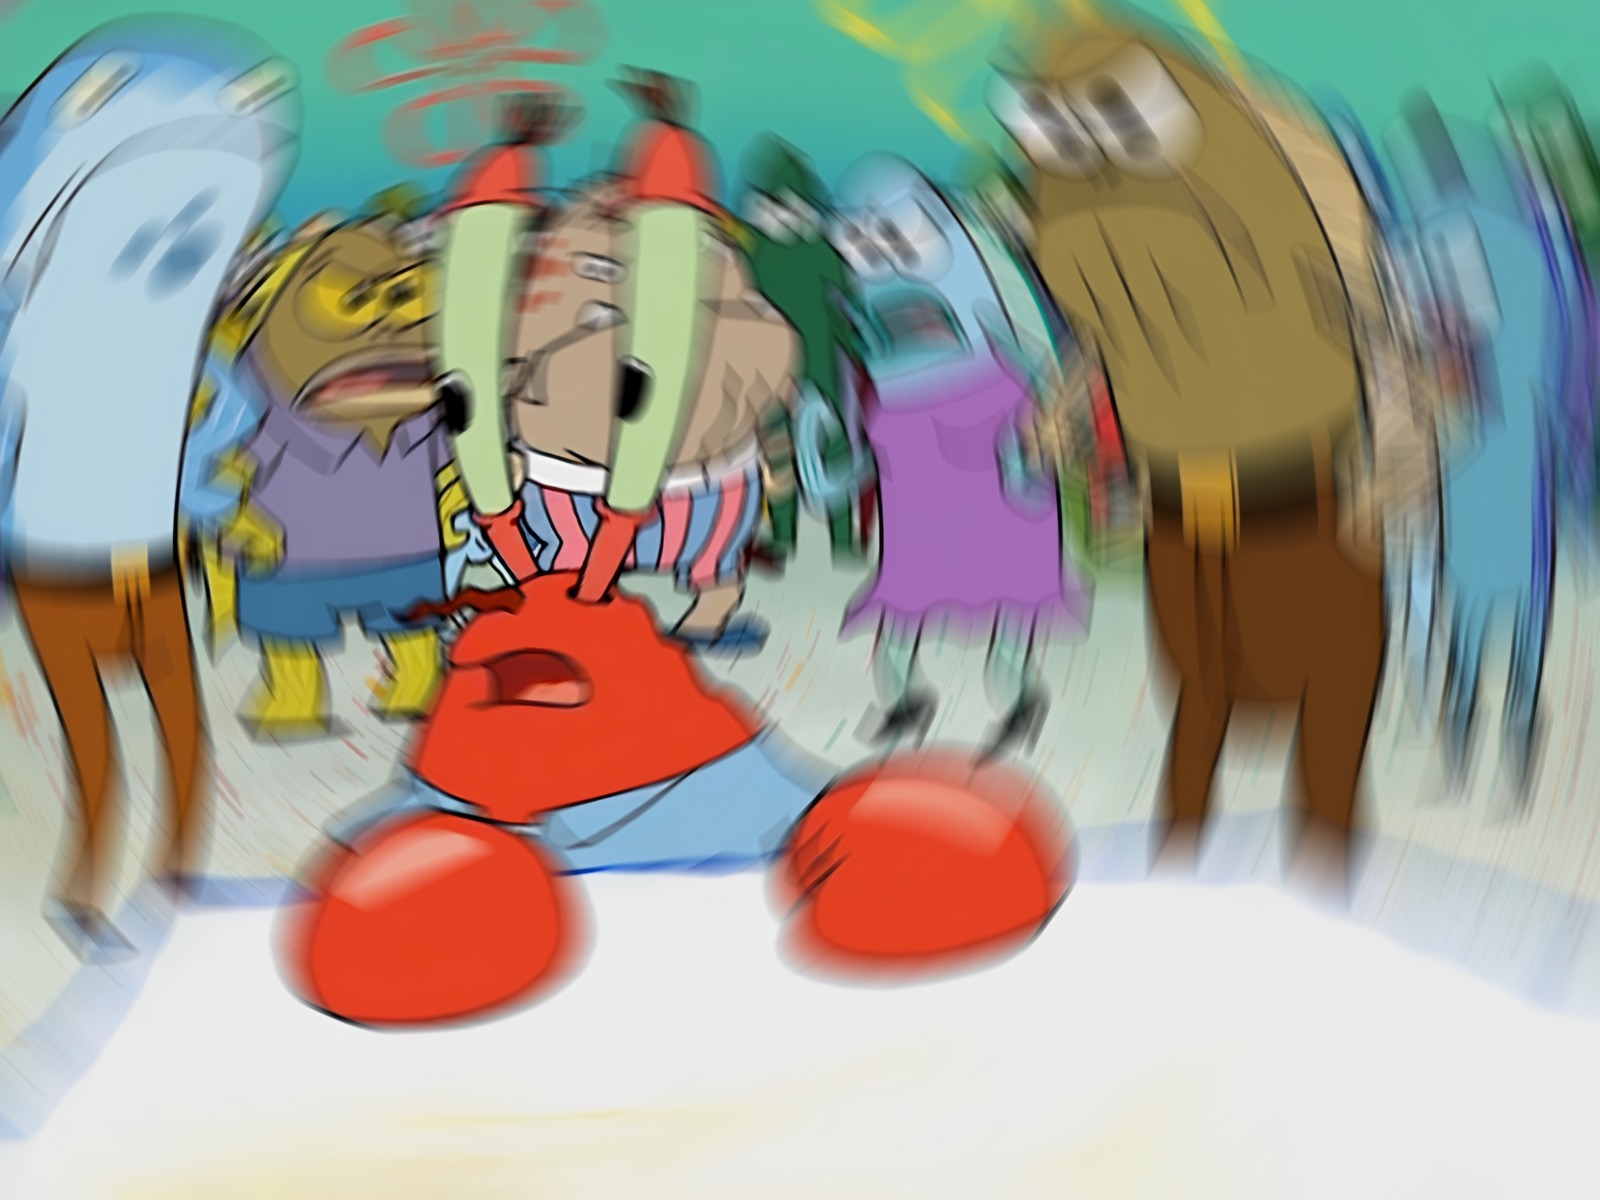 You got: Confused Mr. Krabs! Which Popular SpongeBob Meme Are You? 🧽🤣